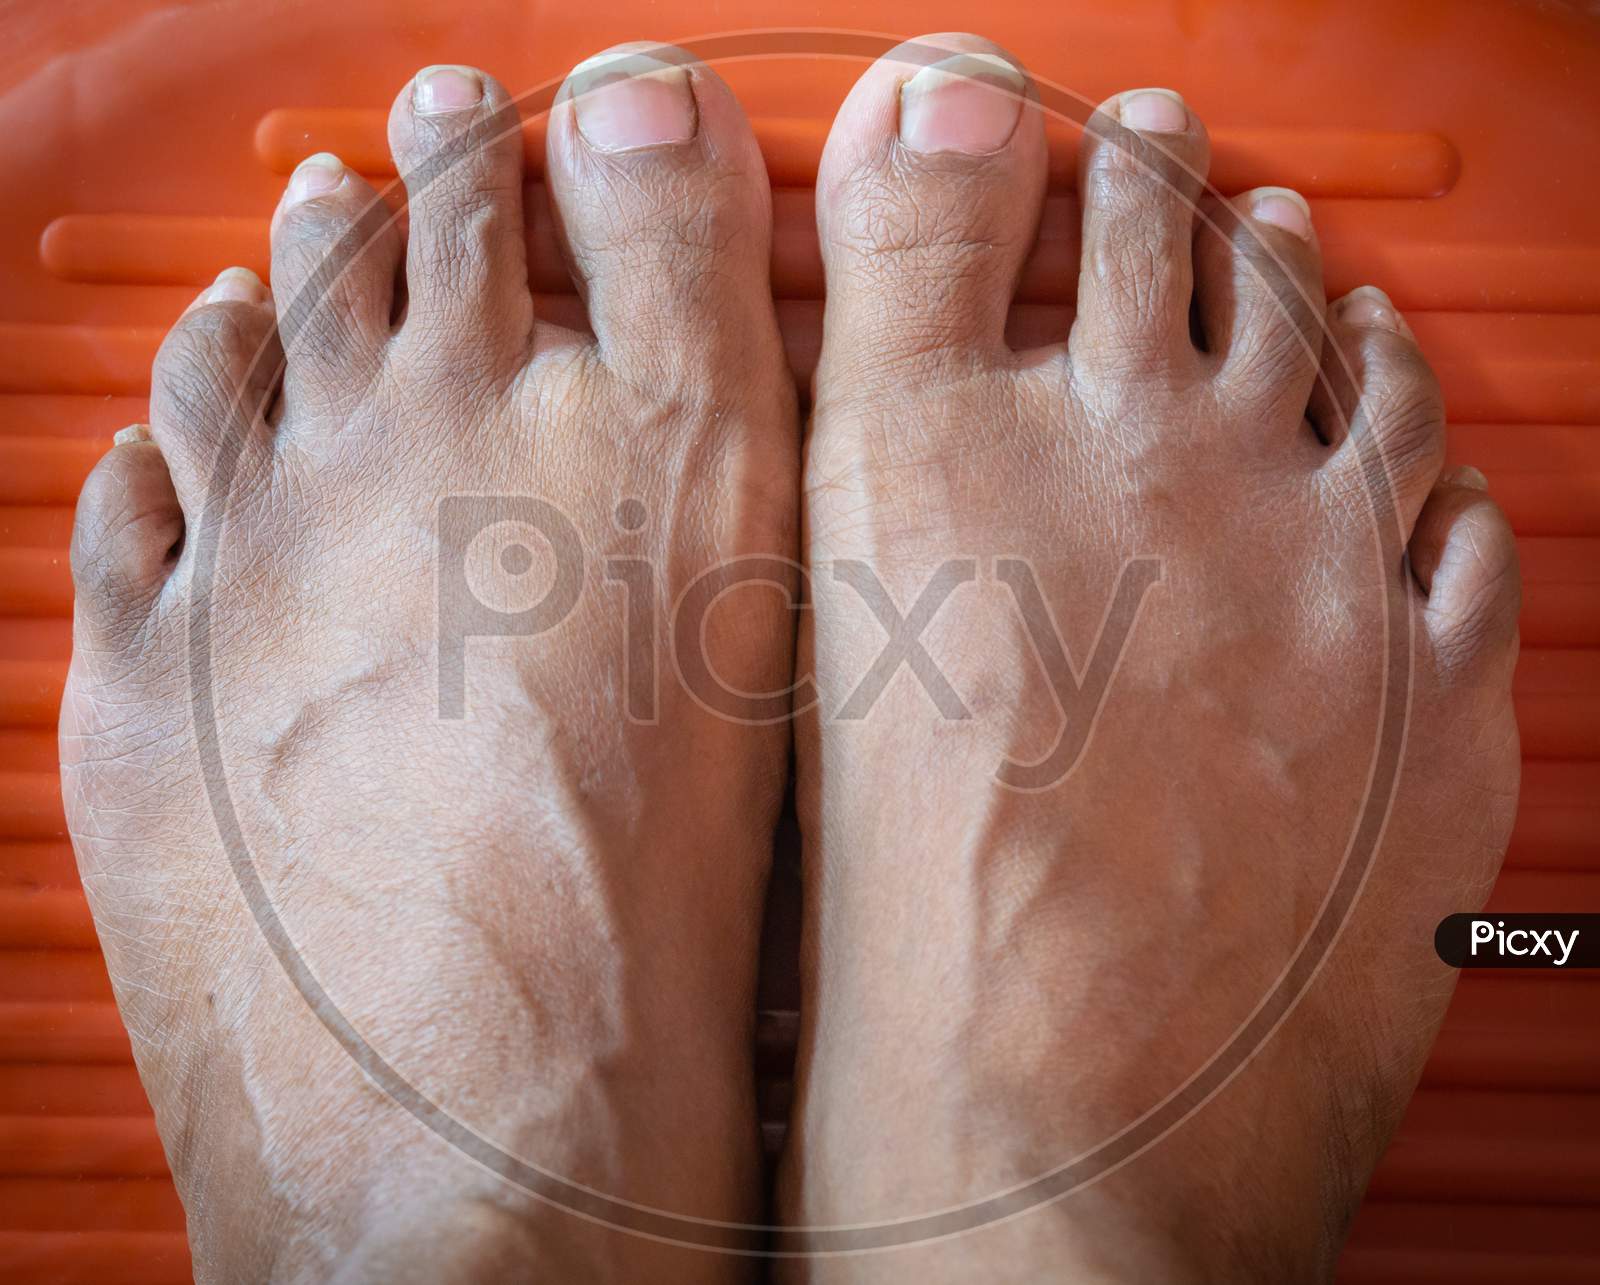 Male Feet Waiting For Pedicure To Be Done